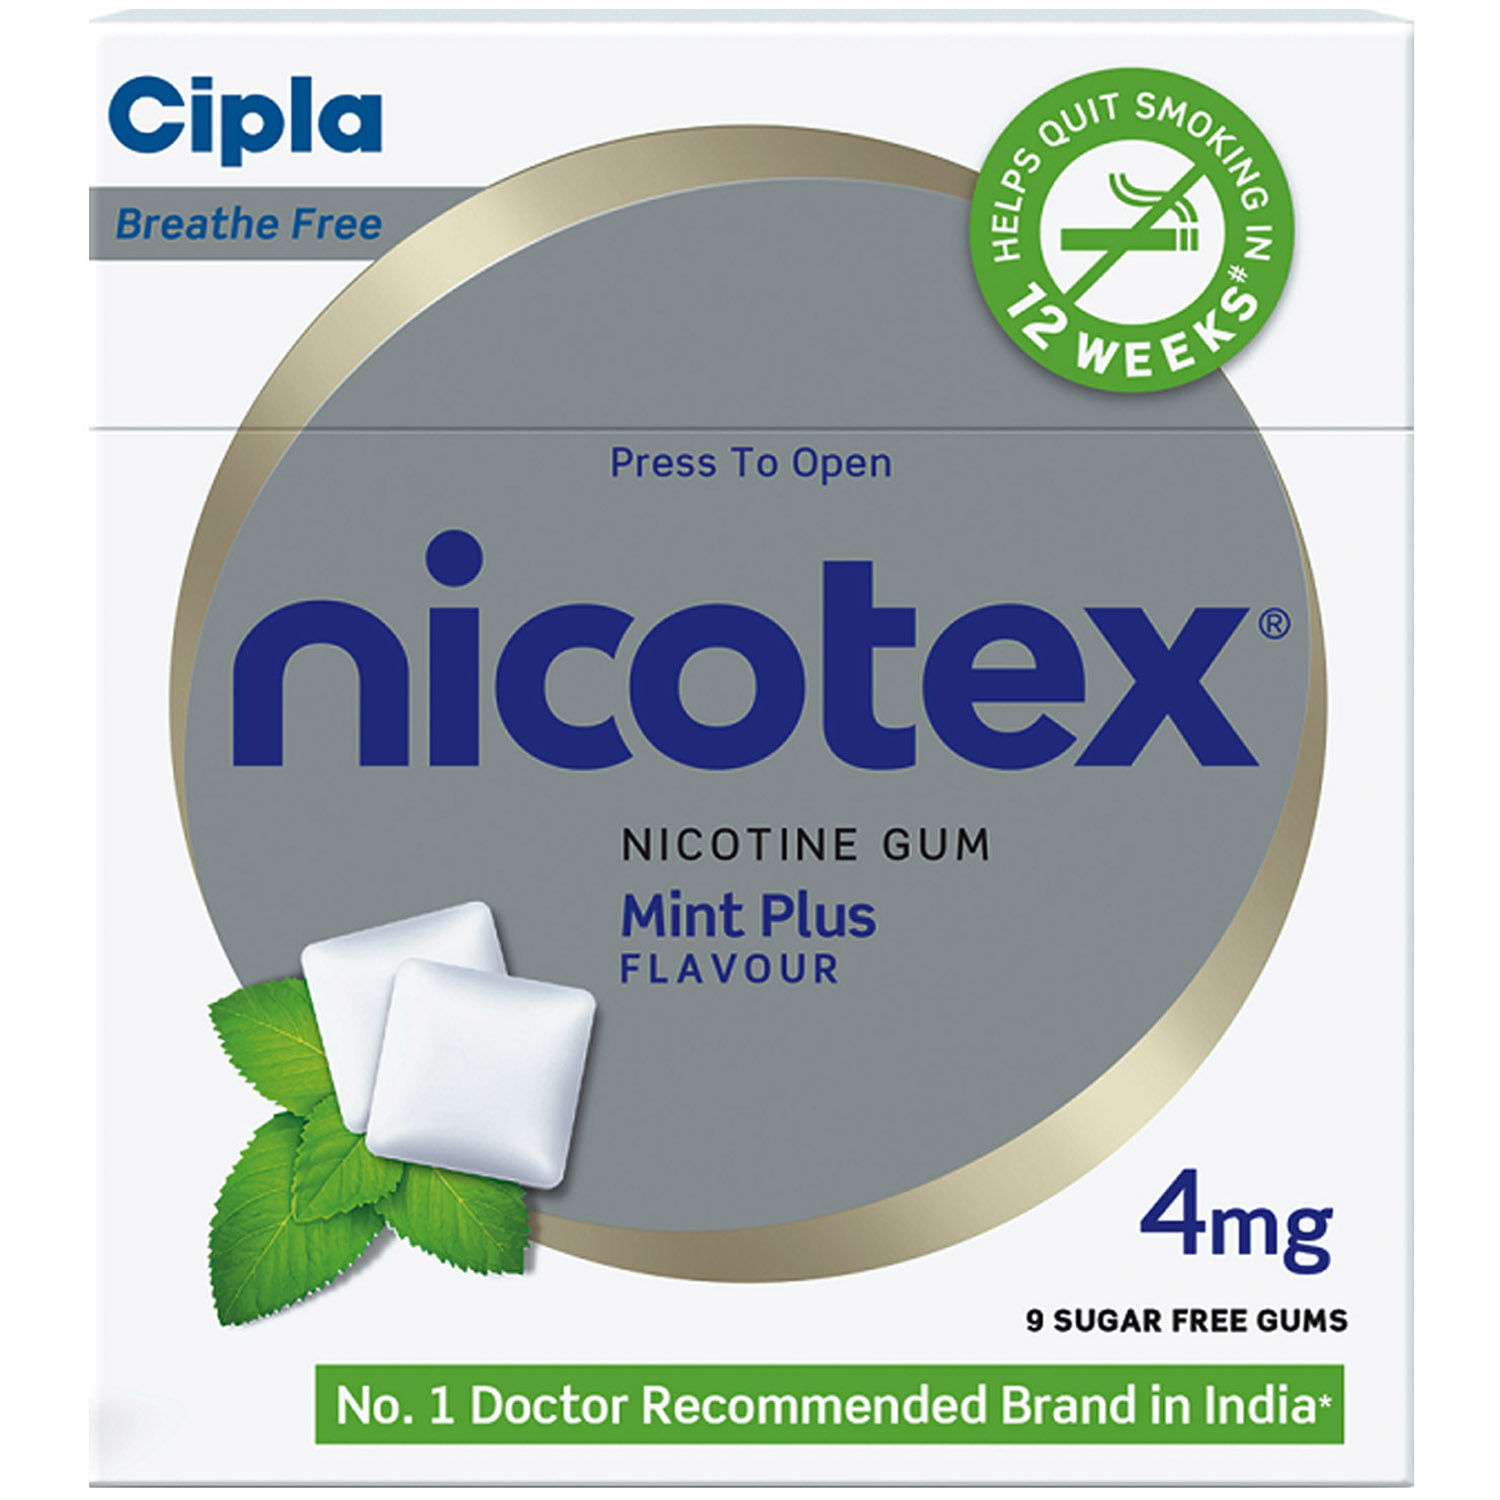 Nicotex Teeth Whitening Mint Plus 4mg, Pack of 1 Chewing Gums